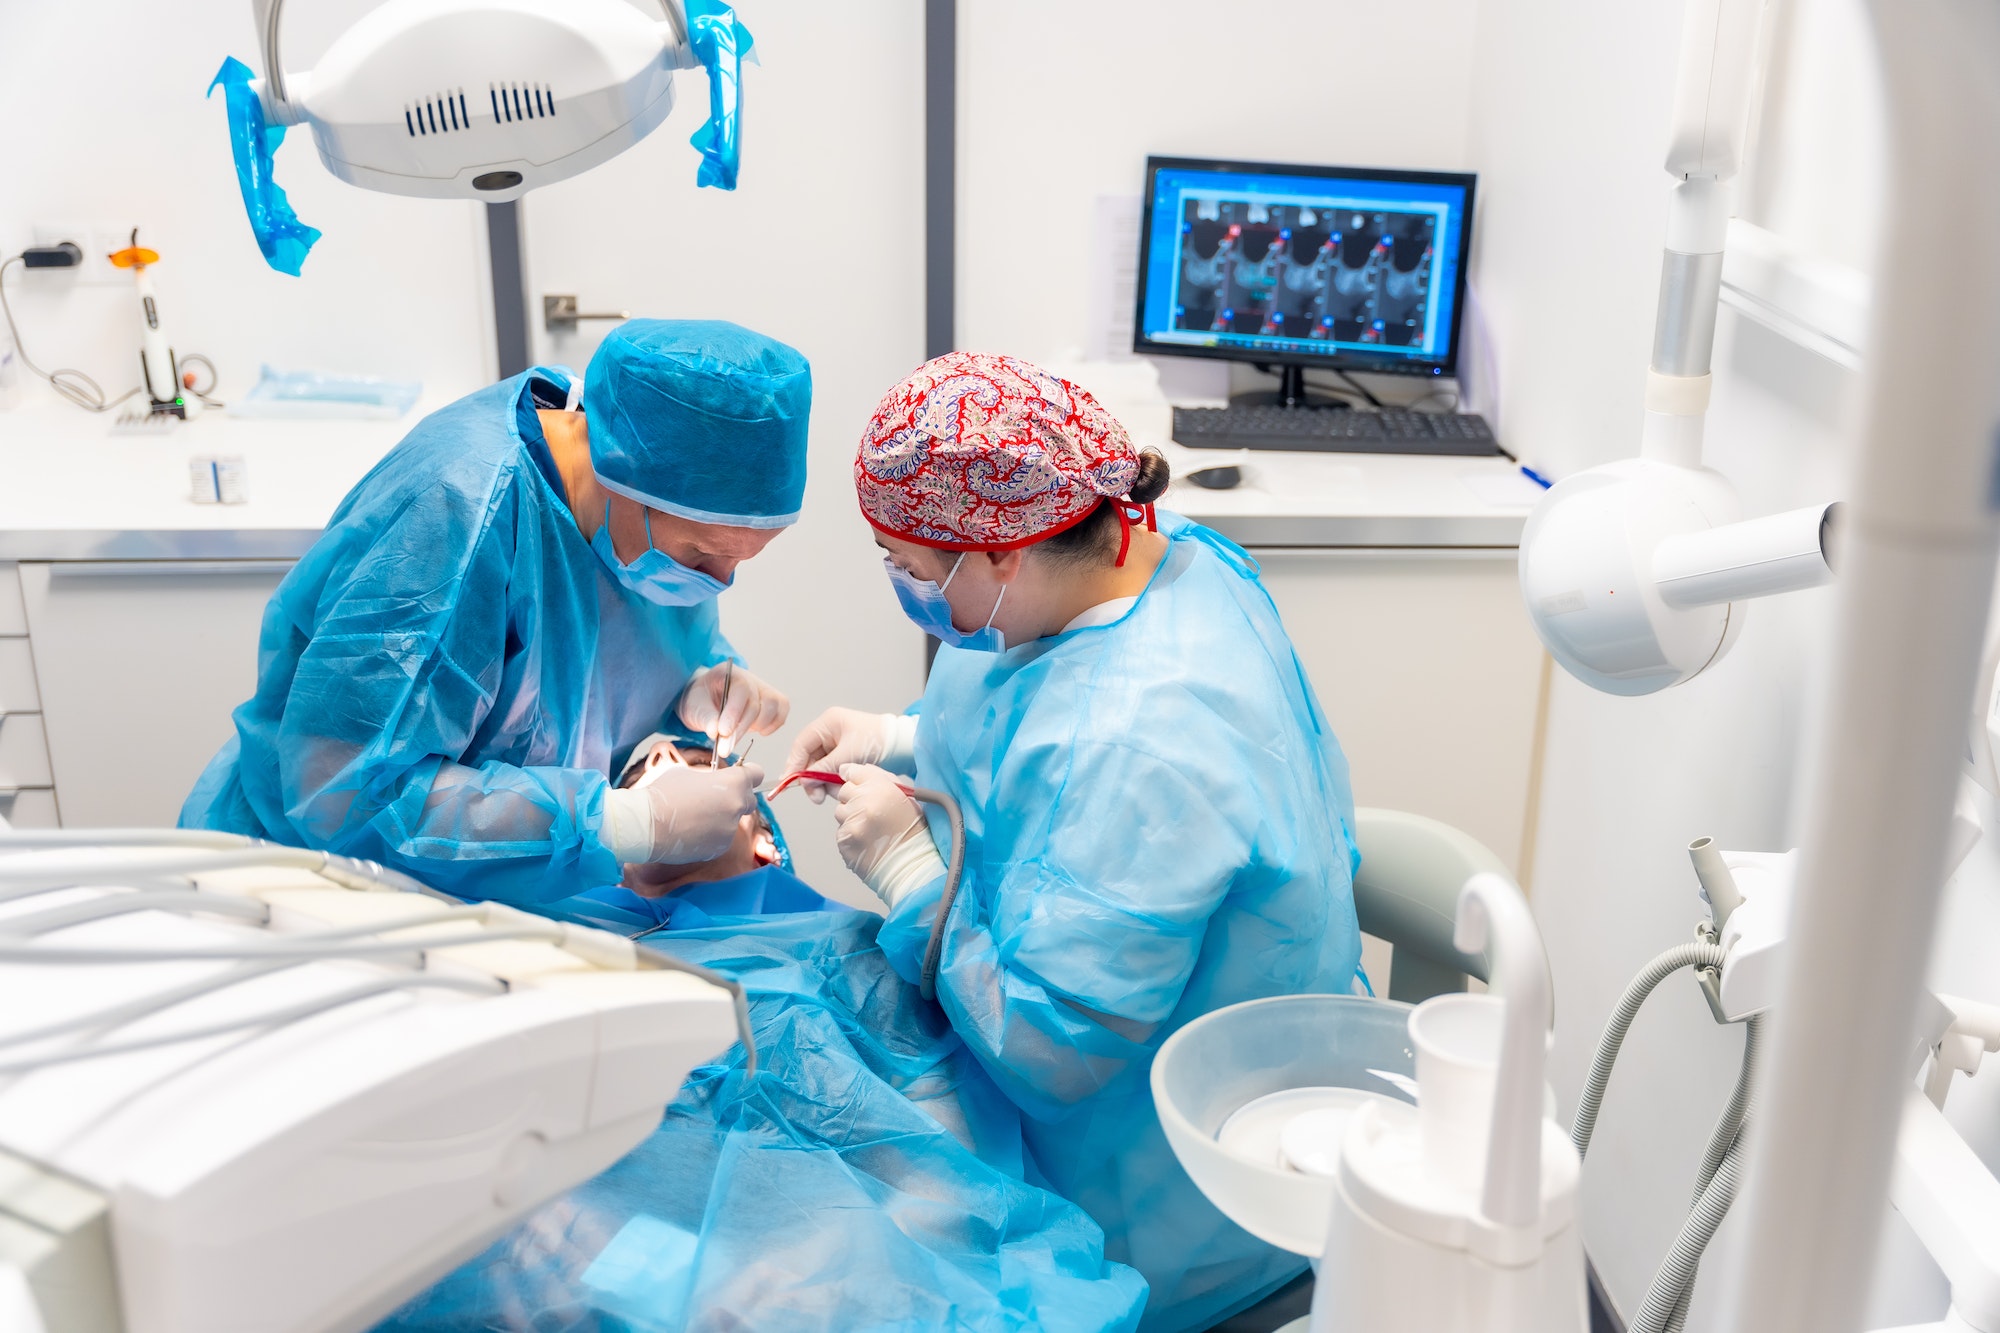 Dental clinic, detail of dentists with blue suits performing an implant, view from above operation